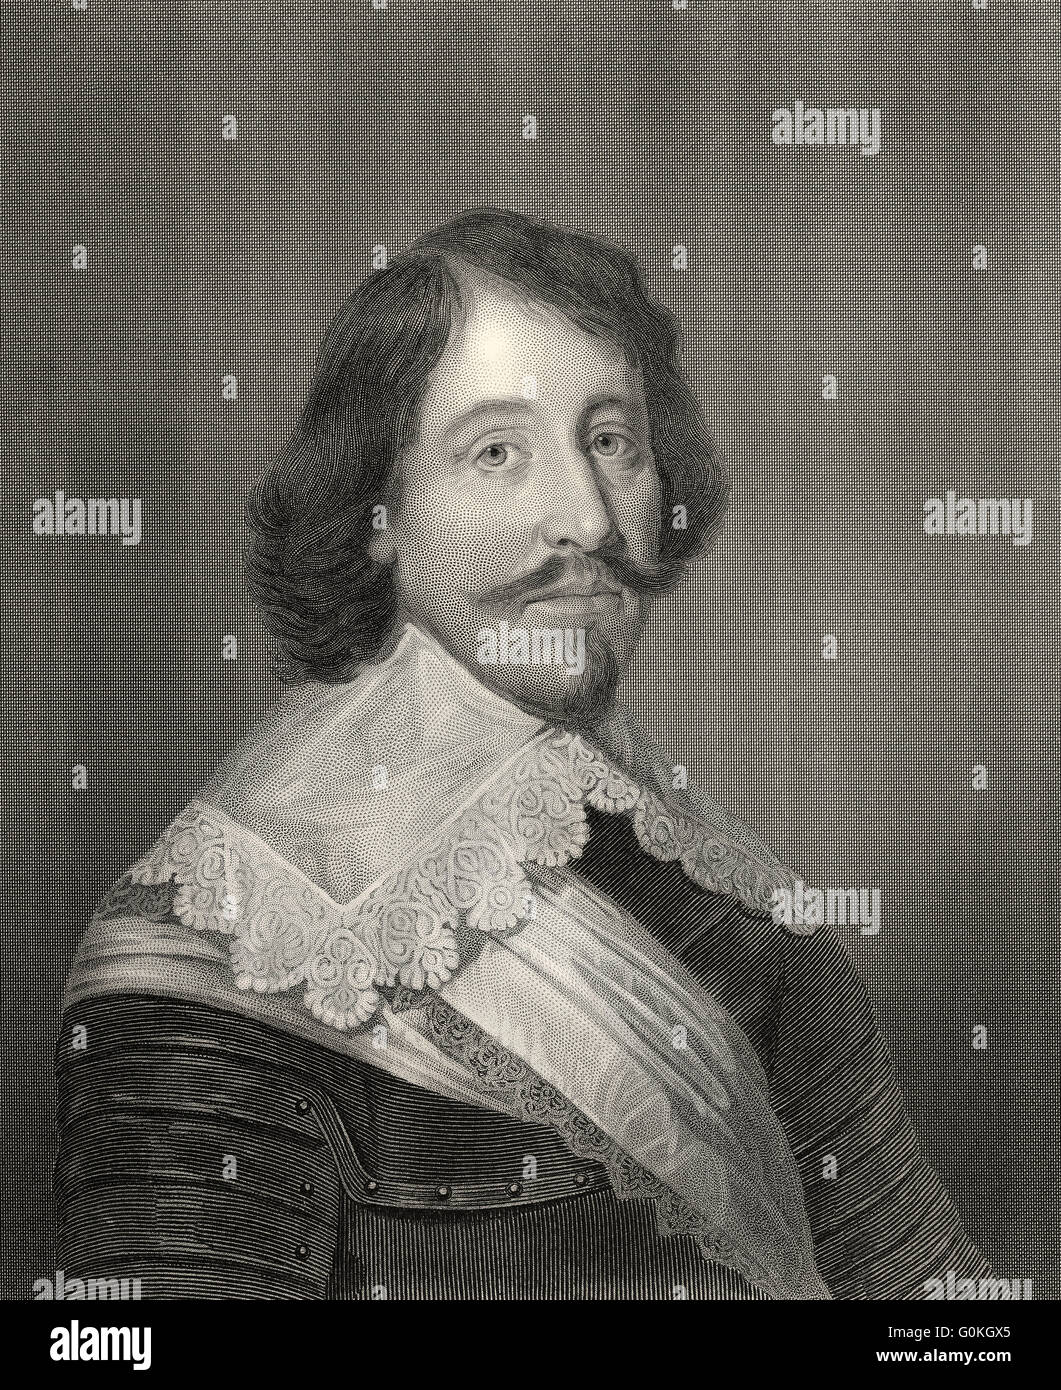 Archibald Campbell, 1st Marquess of Argyll, 8th Earl of Argyll, 1607-1661, the head of government in Scotland during the British Stock Photo